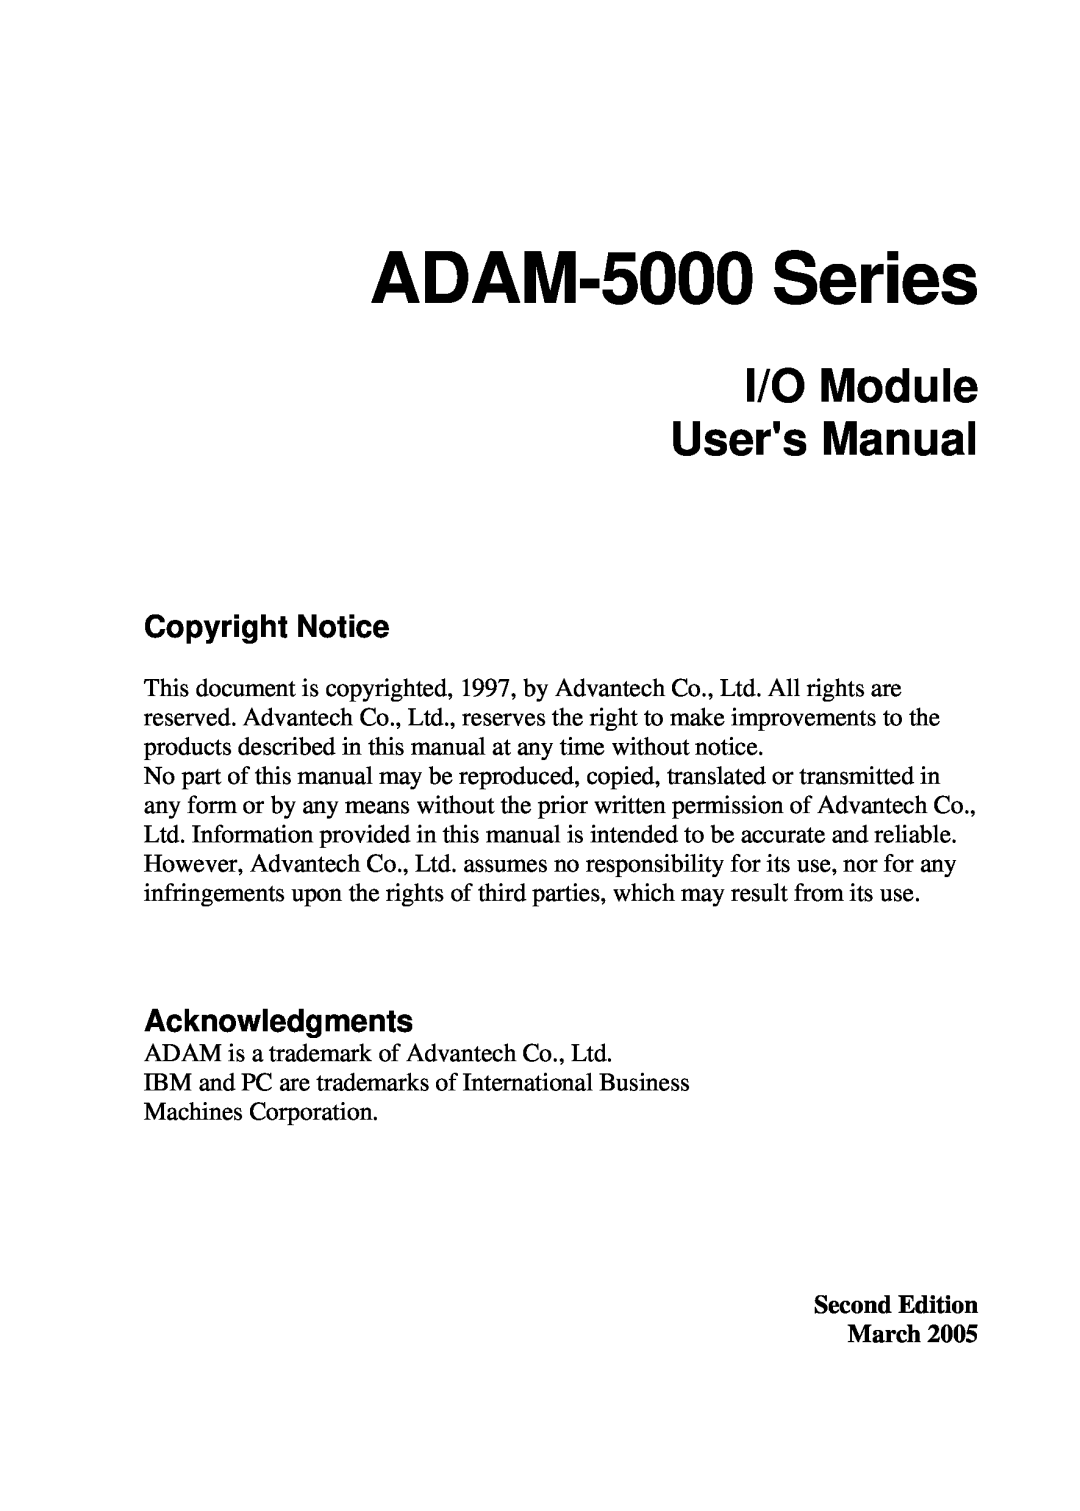 B&B Electronics 5000 Series user manual I/O Module Users Manual, Copyright Notice, Acknowledgments, Second Edition March 